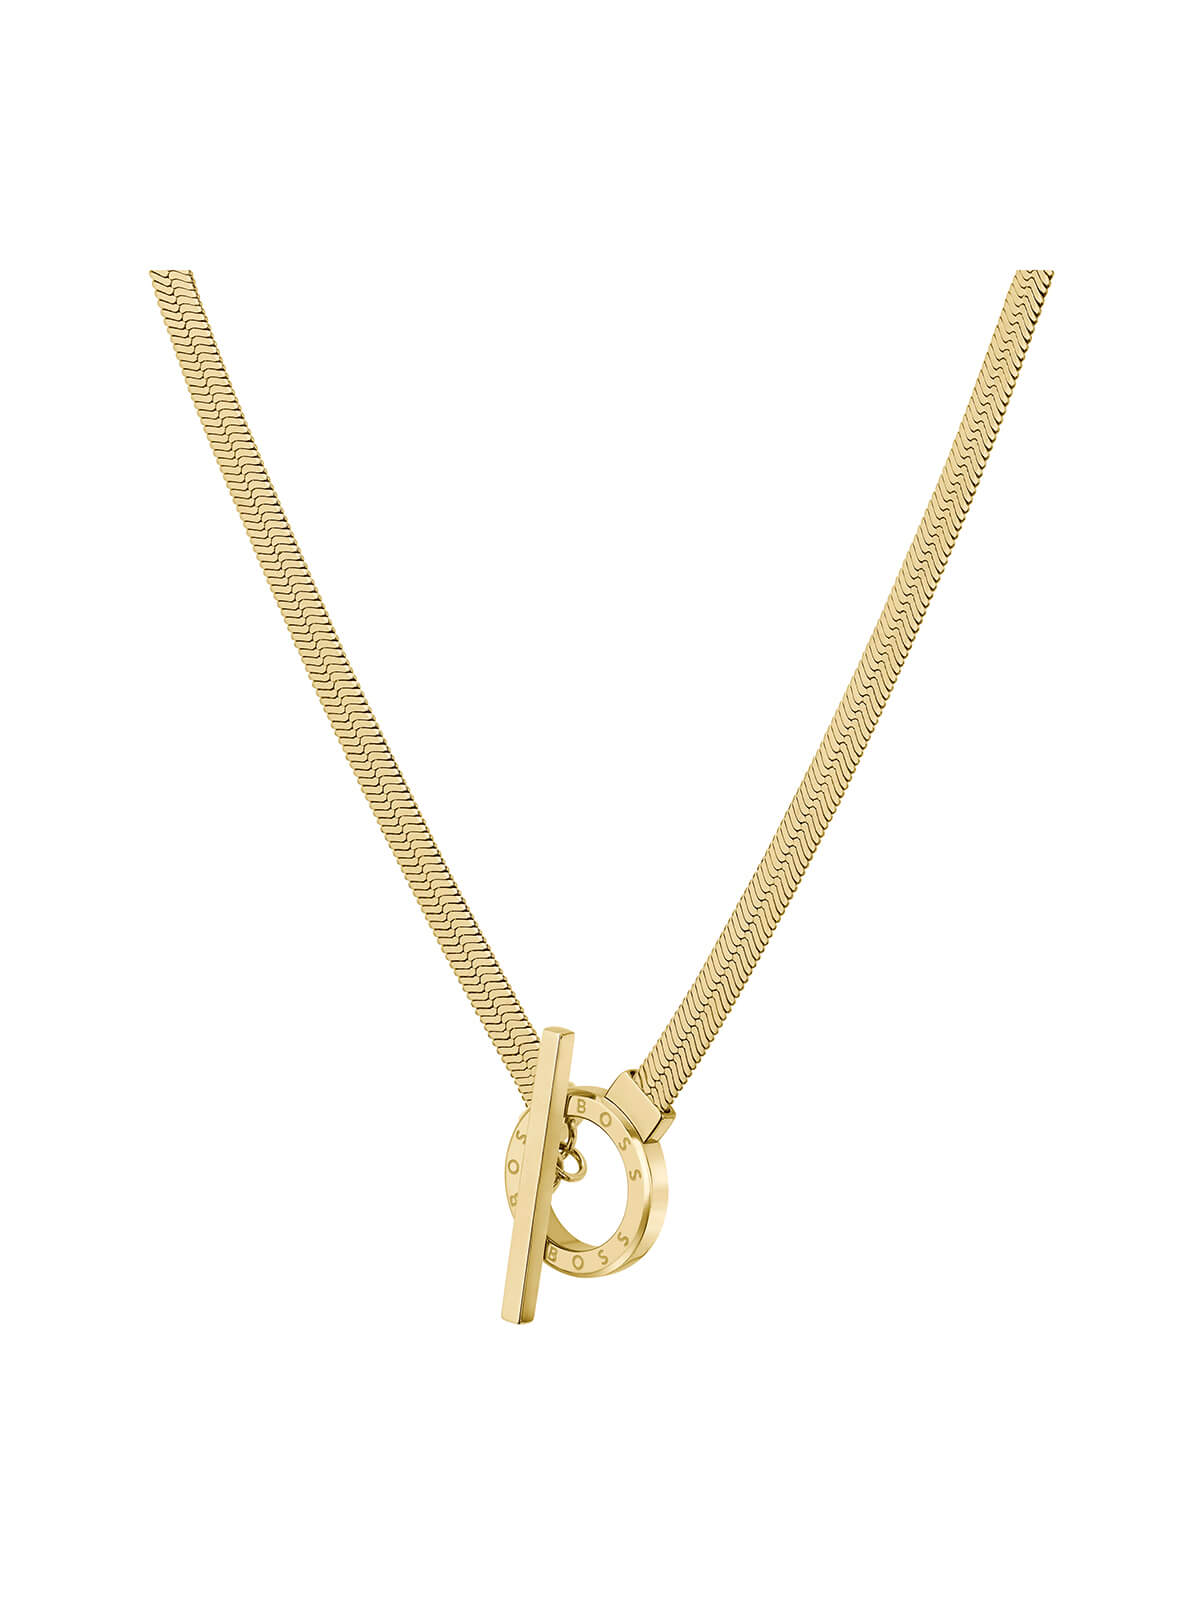 BOSS Zia Necklace in Gold Plating 1580480